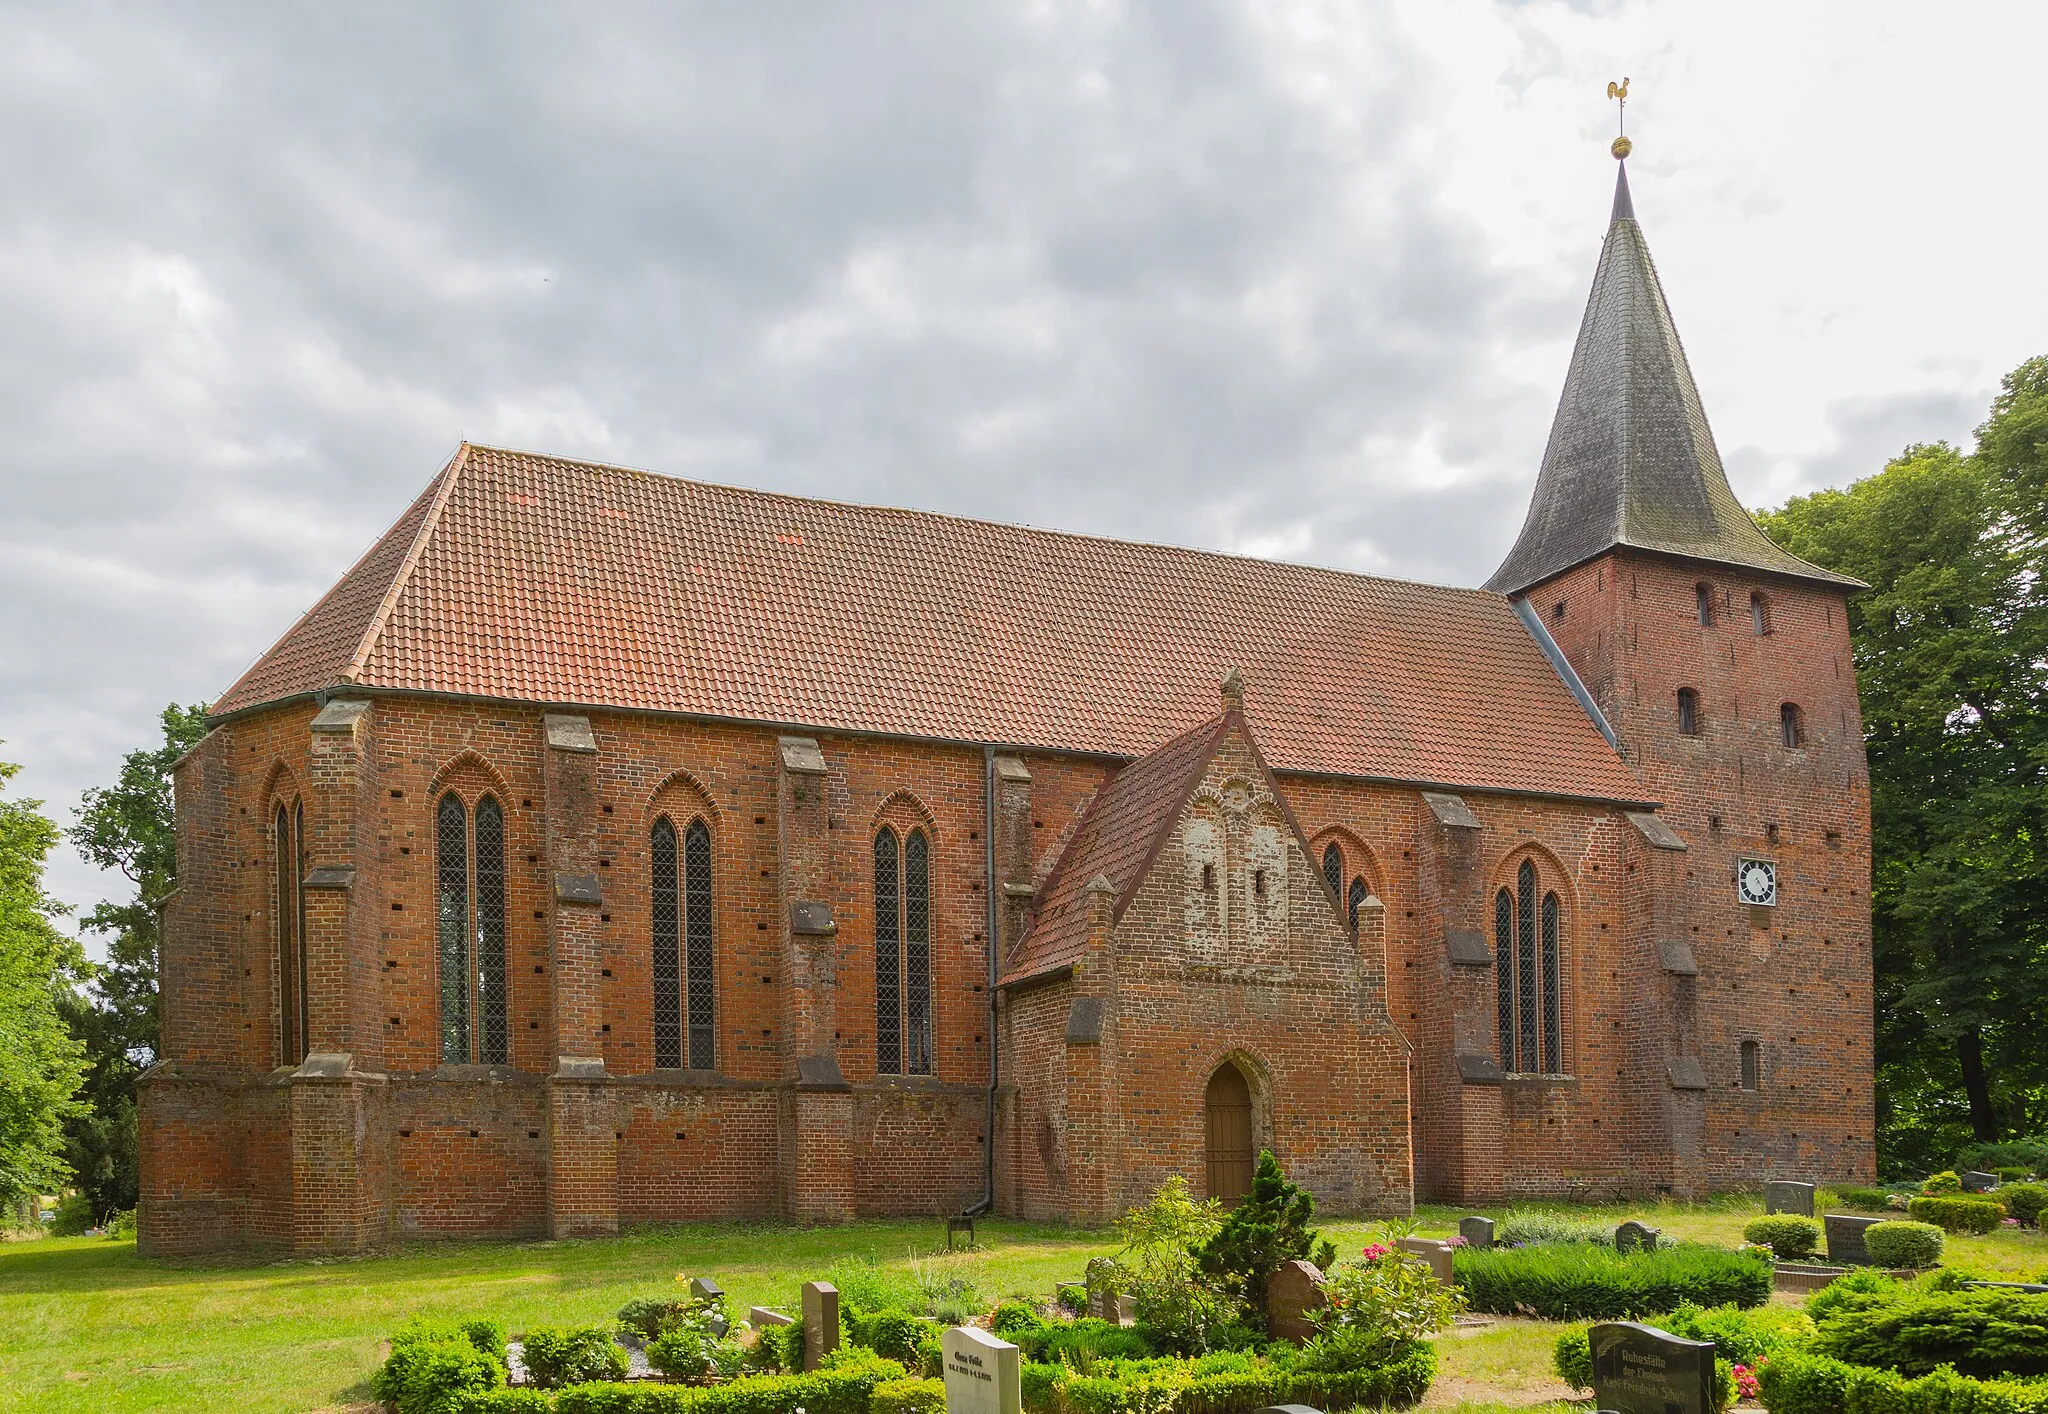 Photo showing: The Lutheran Village Church of Gressow, district of Gägelow, Landkreis Nordwestmecklenburg, Mecklenburg-Western Pomerania, Germany. The church is a listed cultural heritage monument.